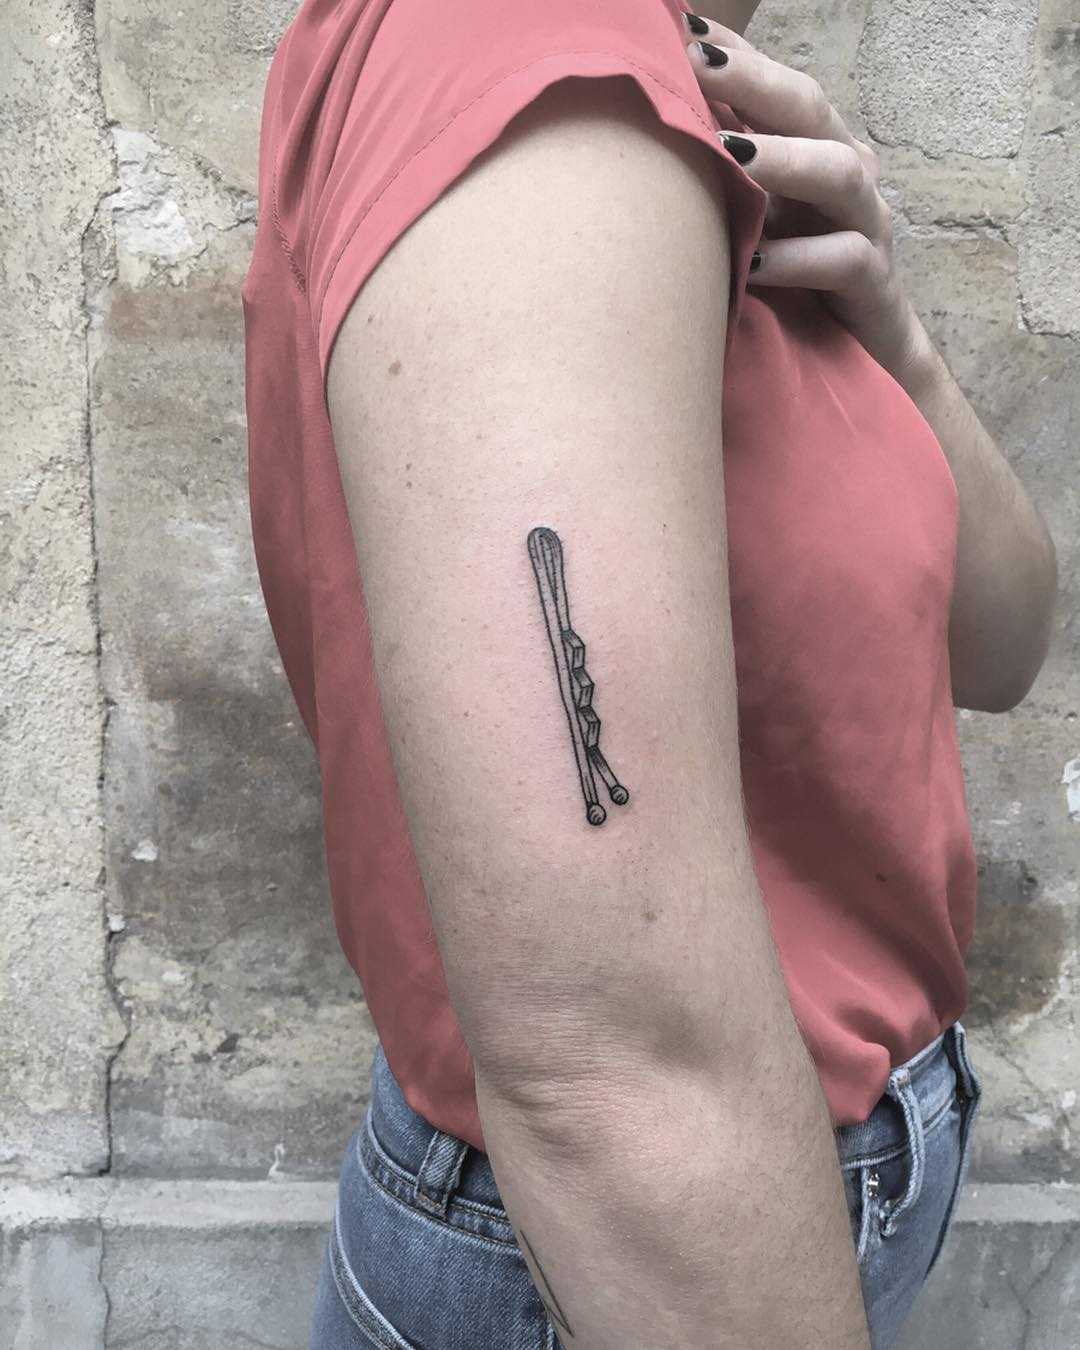 Bobby pin tattoo on the arm 